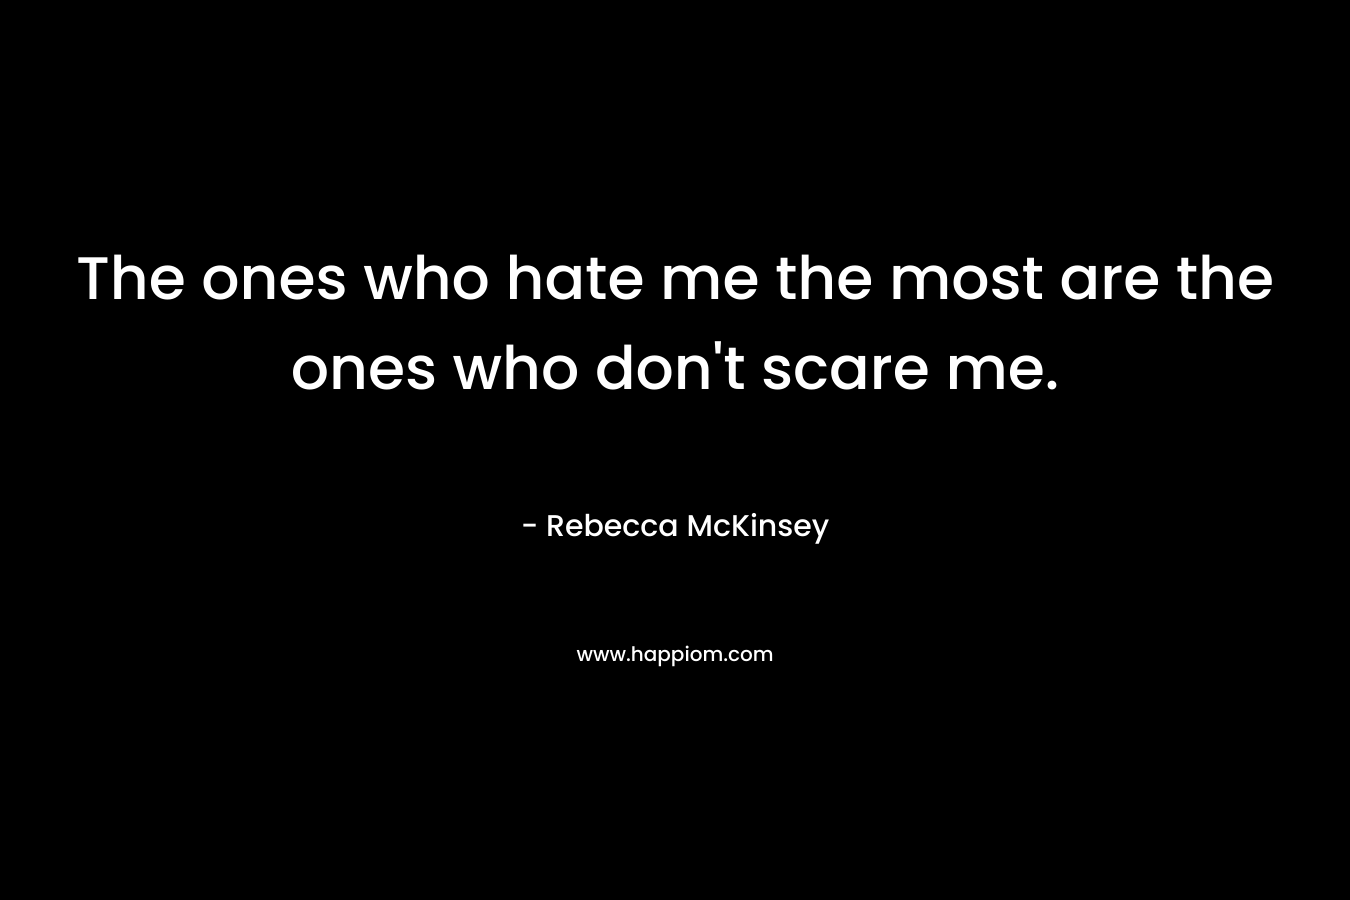 The ones who hate me the most are the ones who don’t scare me. – Rebecca McKinsey